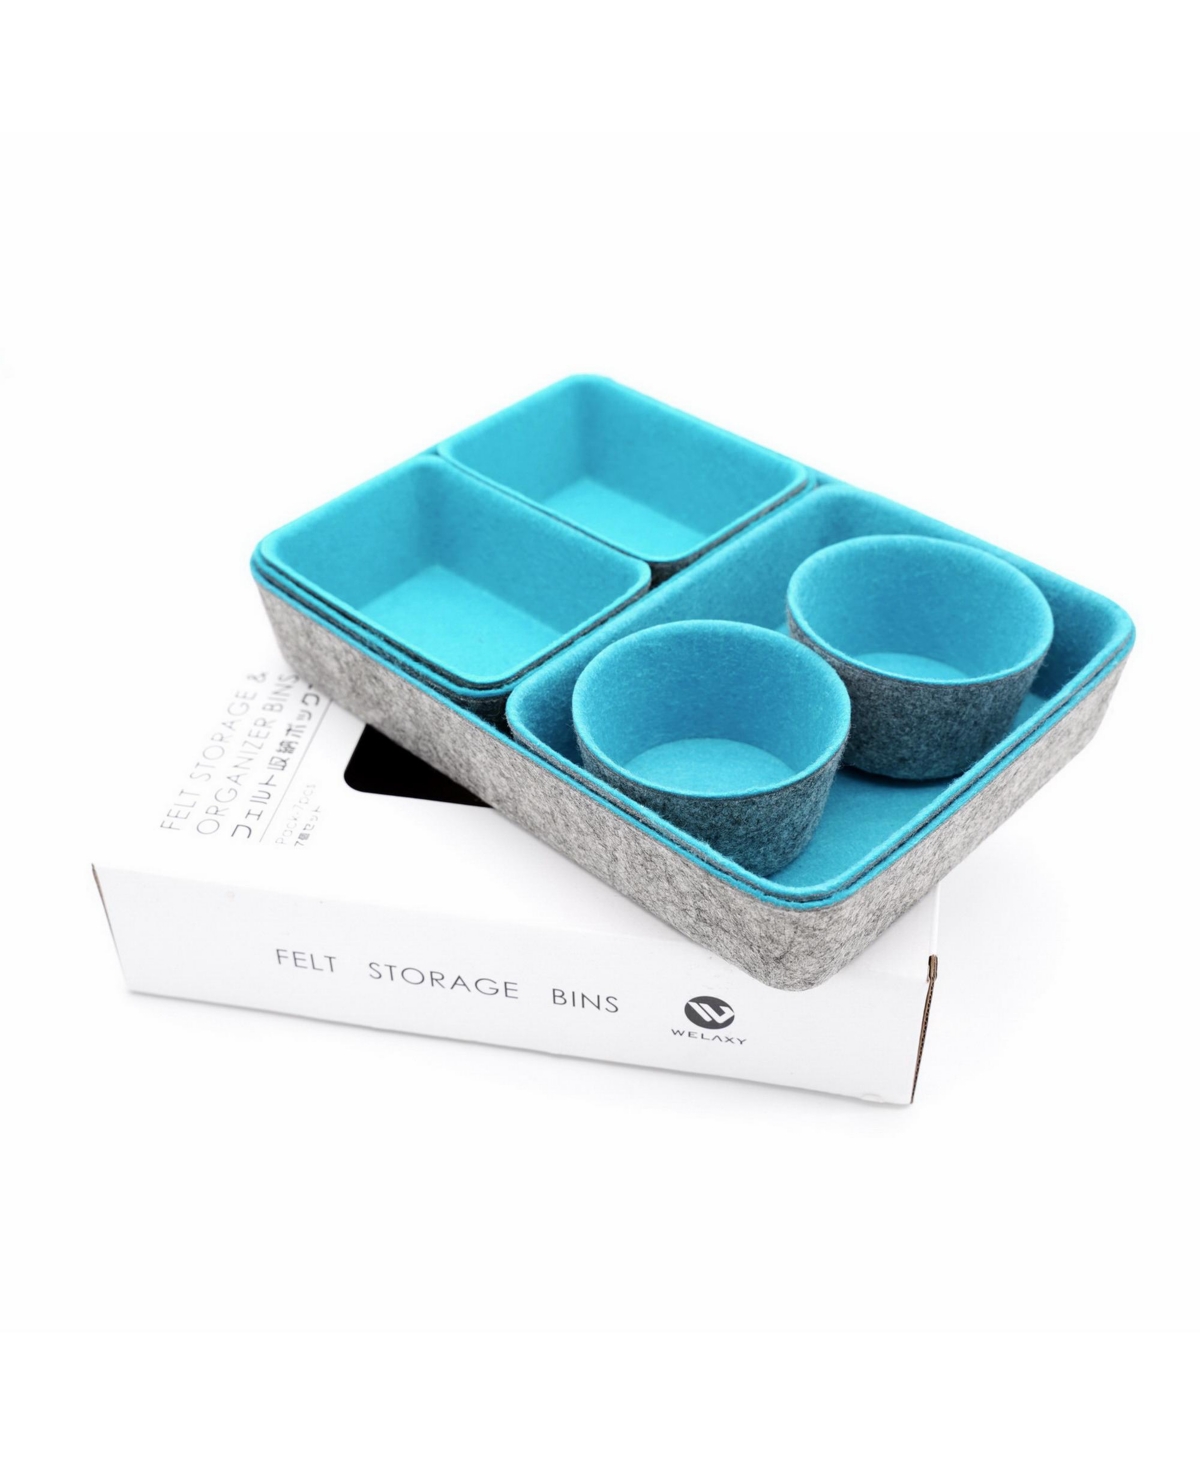 Welaxy 7 Piece Felt Drawer Organizer Set With Round Cups And Trays In Turquoise